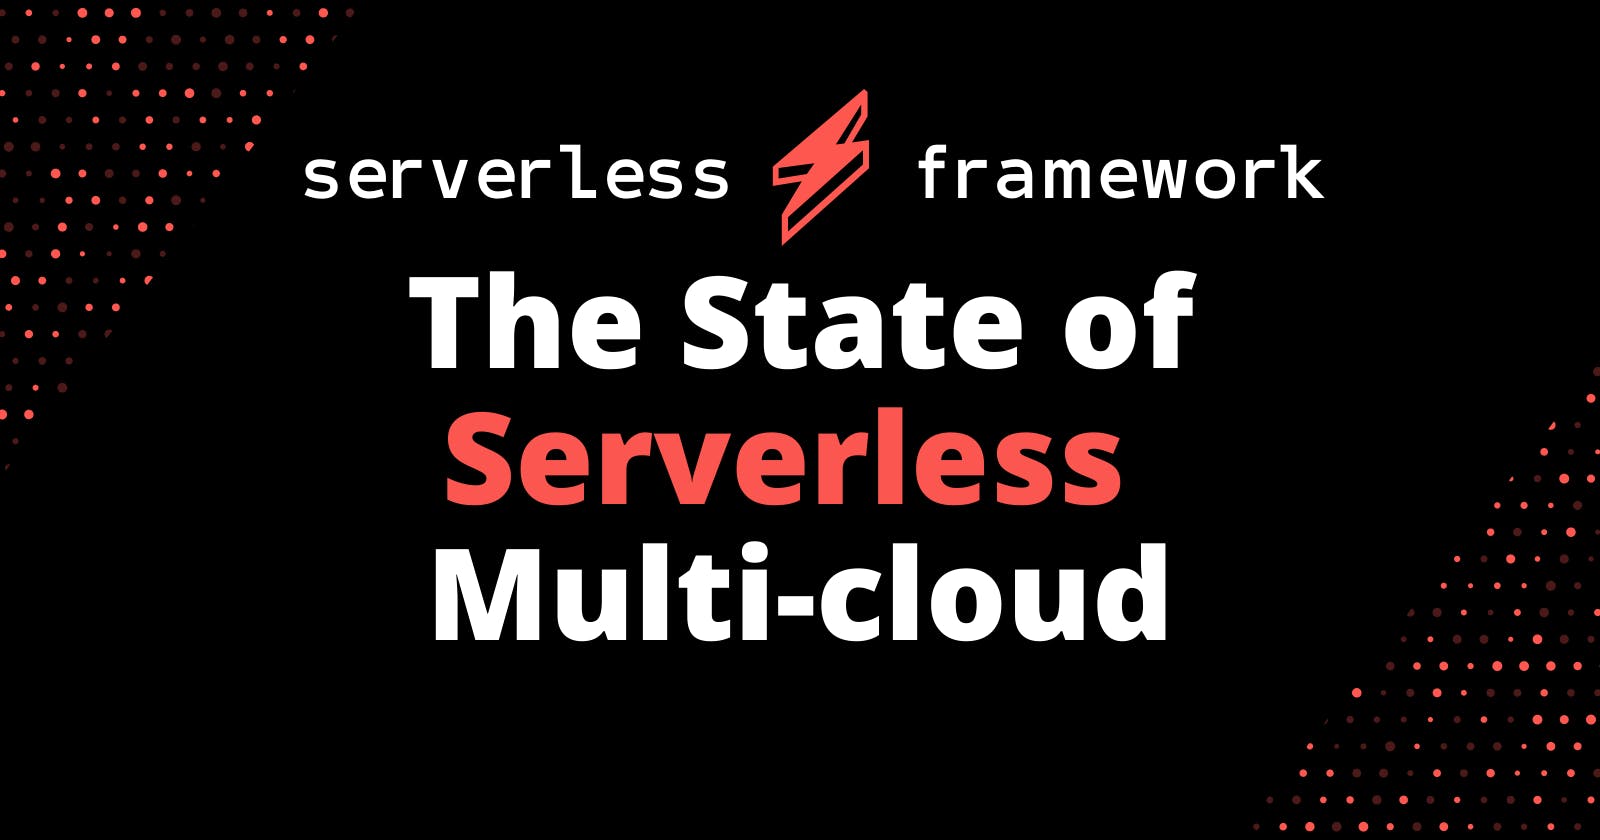 The State of Serverless Multi-cloud